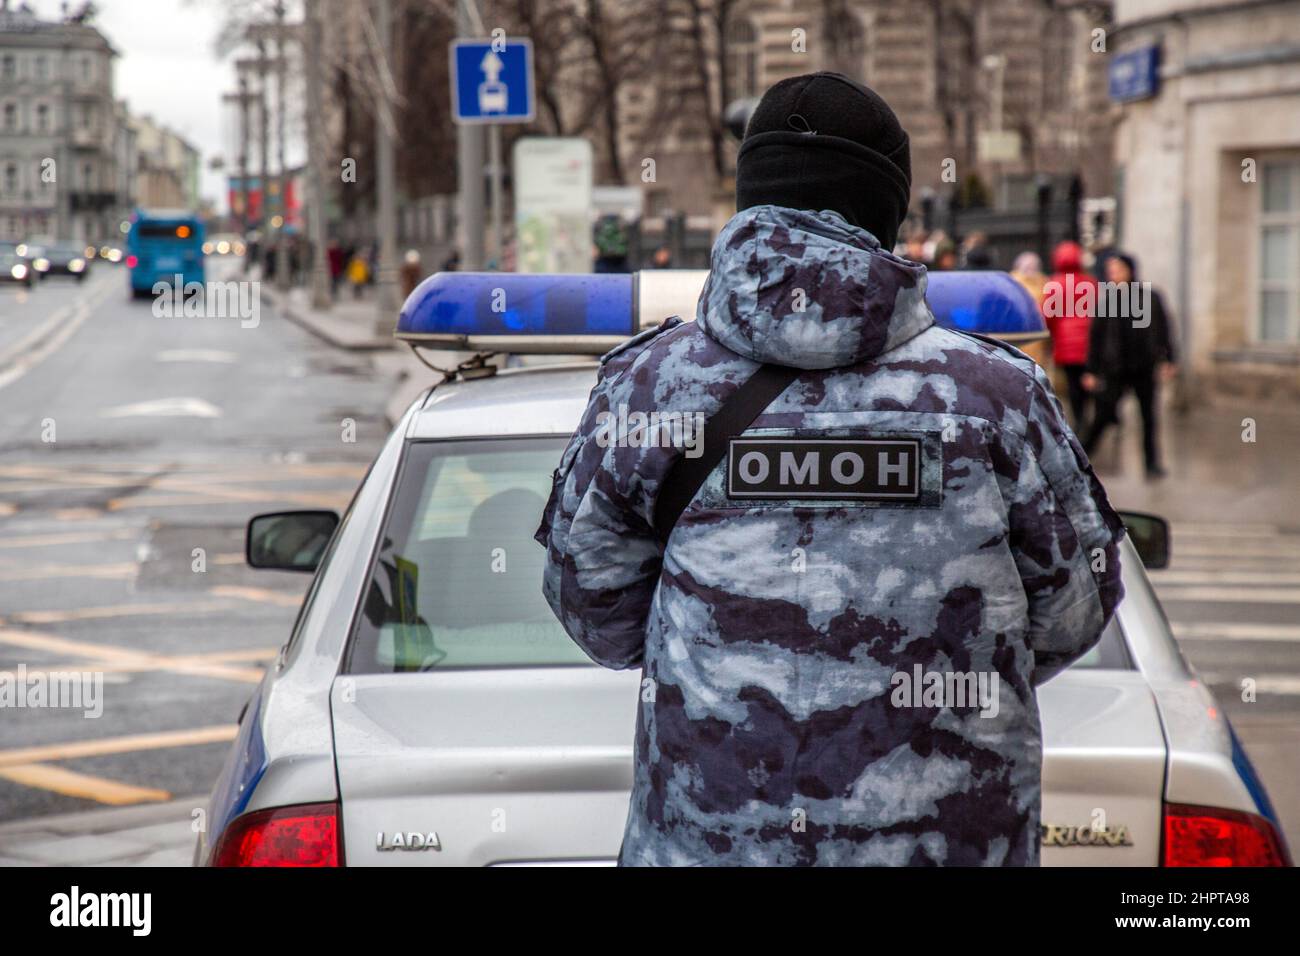 Moscow, Russia. 23rd of February, 2022 A police officer provides security on Mokhovaya Street in the center of Moscow city, Russia Stock Photo